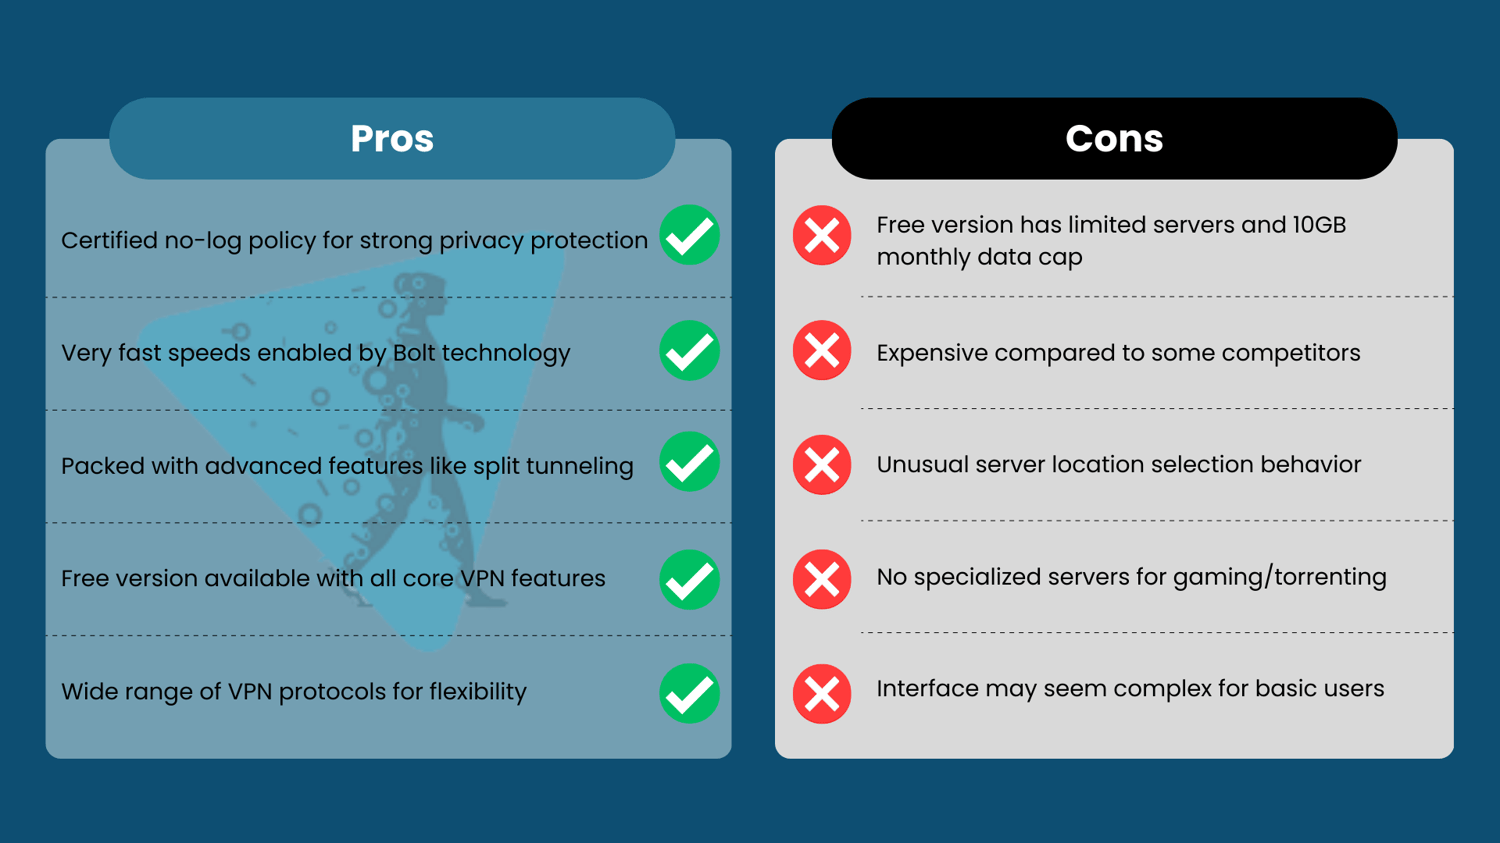 Hideme pros and cons